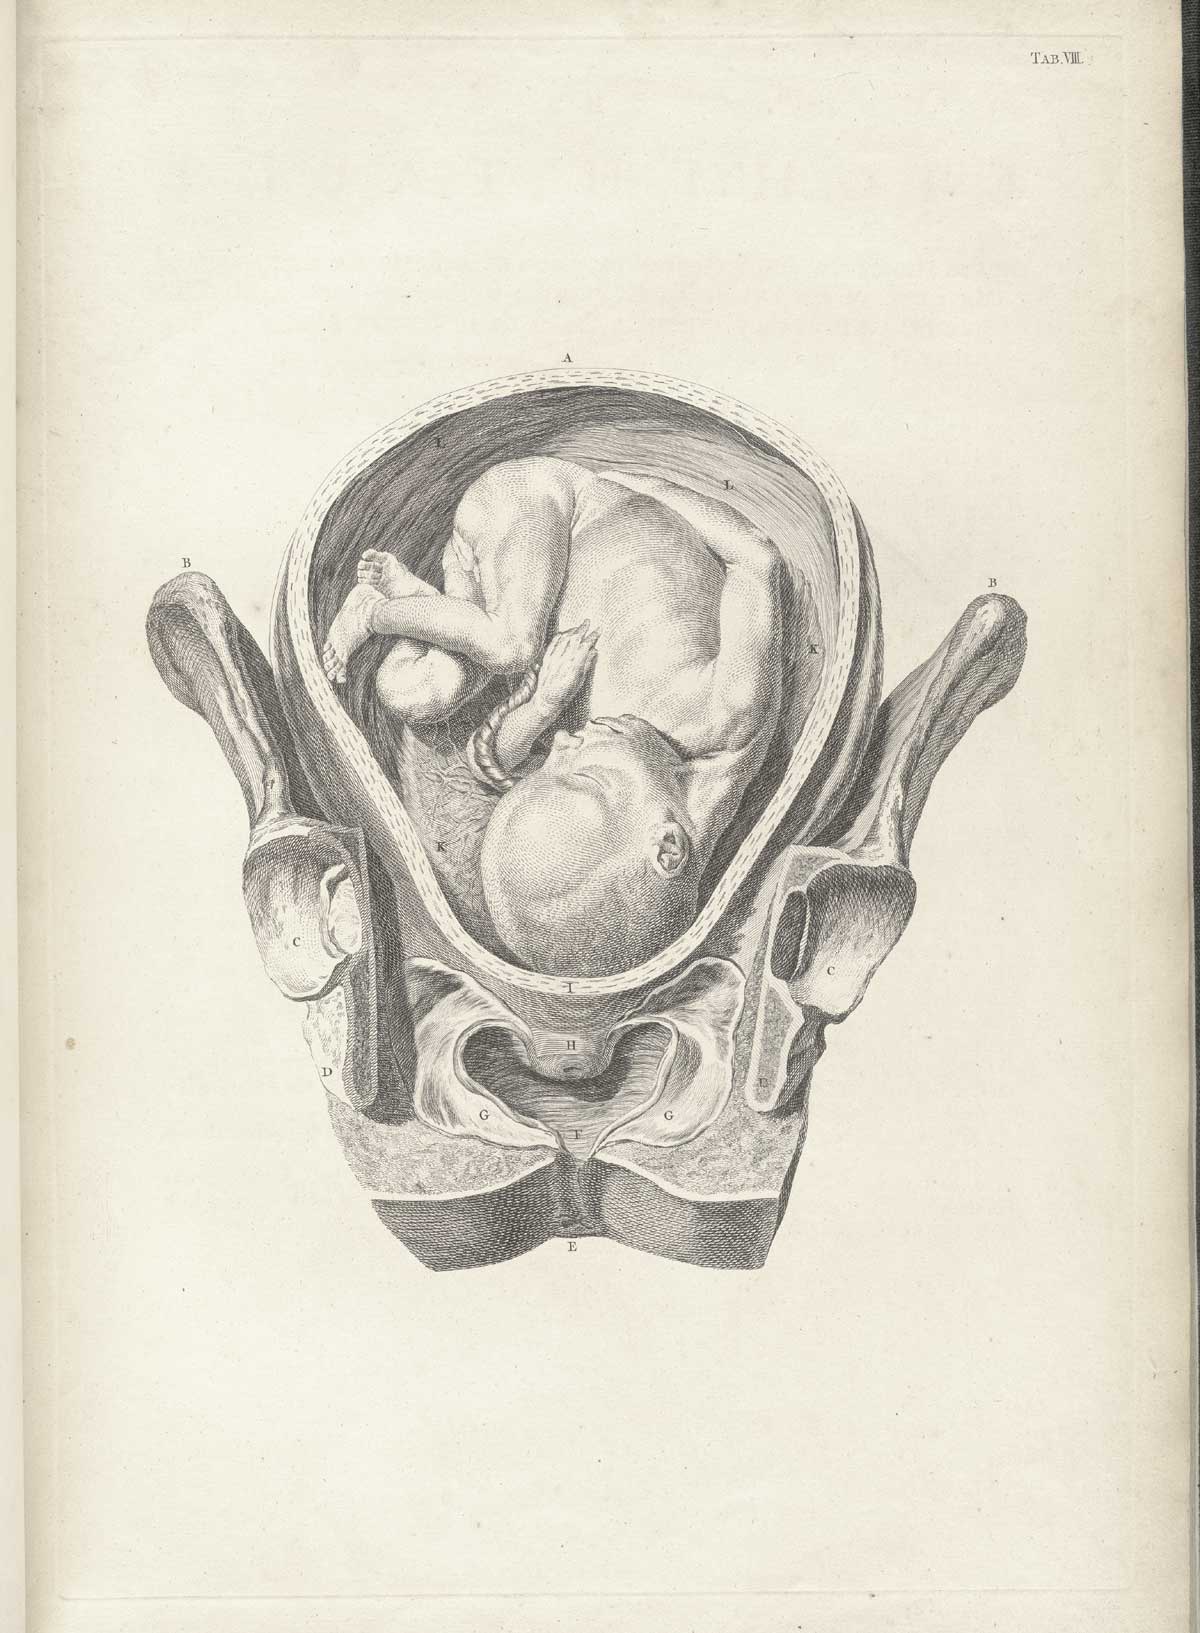 Table 8 of William Smellie's A sett of anatomical tables, with explanations, and an abridgment, of the practice of midwifery, featuring the illustrated drawing of a woman's pelvis and uterus with a fetus.